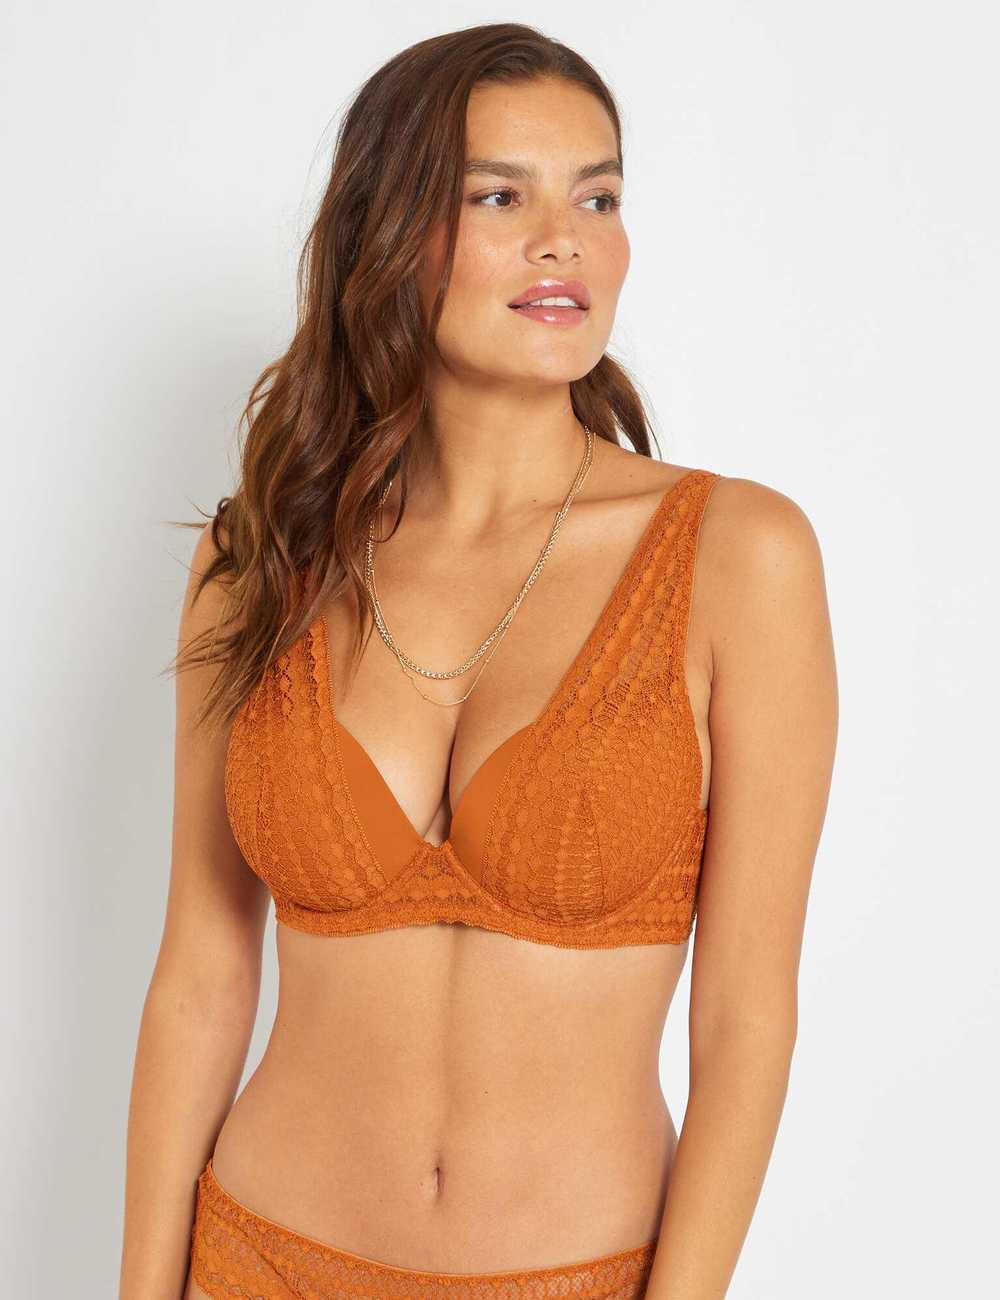 Buy Lace bra for D&E cups Online in Dubai & the UAE